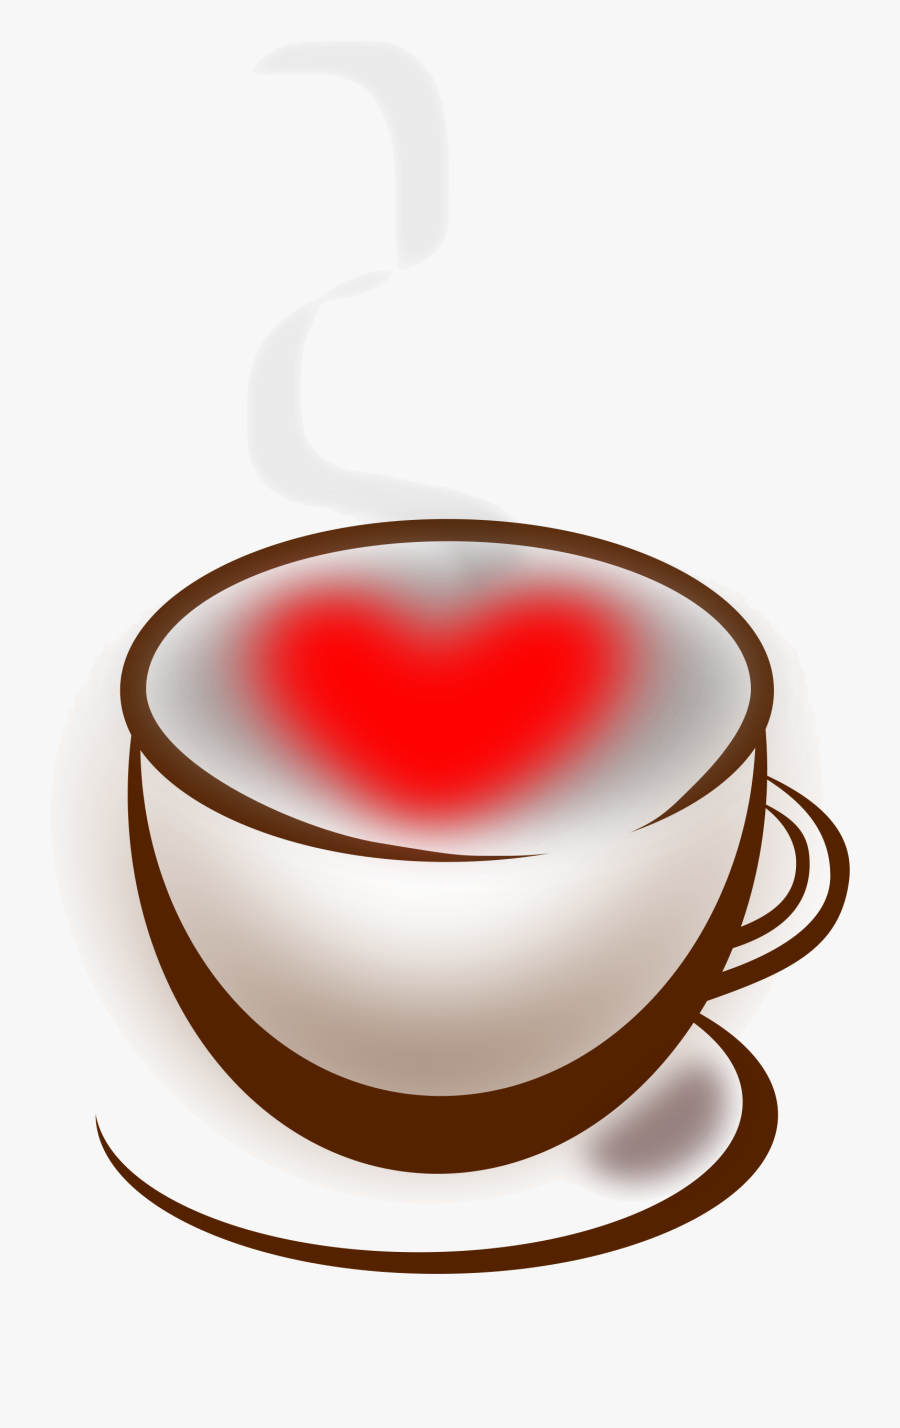 Coffee Clipart Love Cafe Con Amor Image Transparent - Big Red Coffee Cup Clip Art, Transparent Clipart